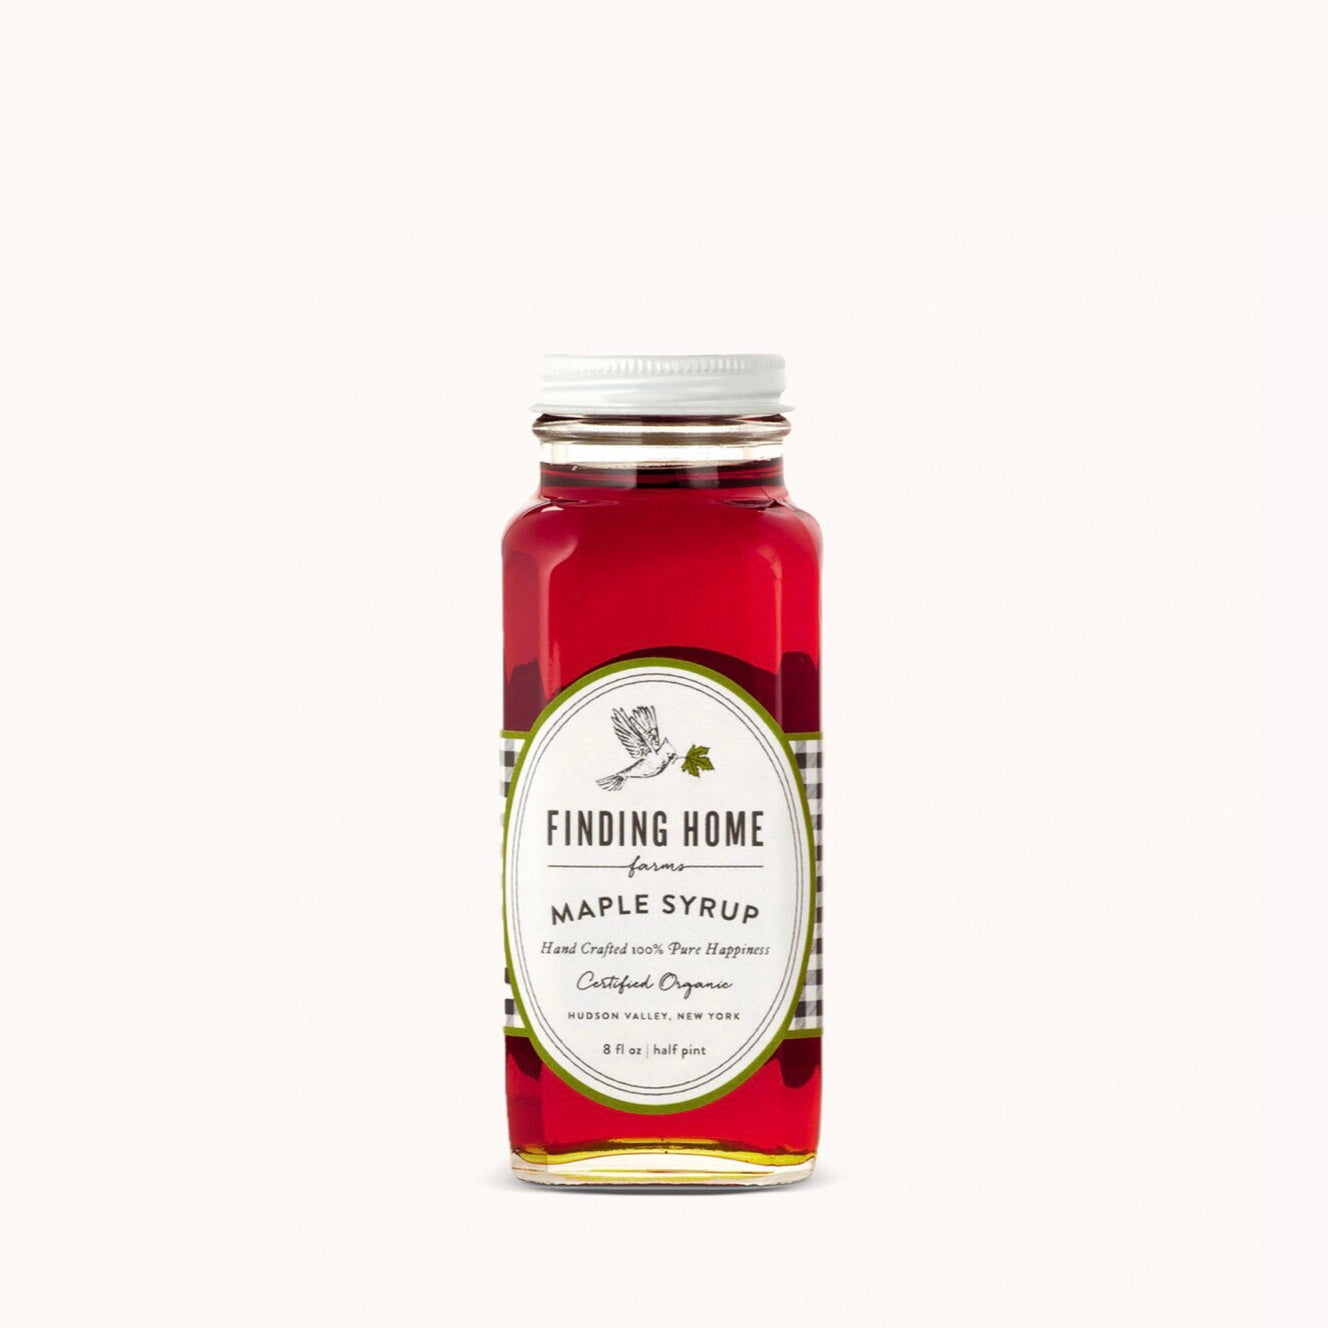 8oz Pure Maple Syrup - Certified Organic